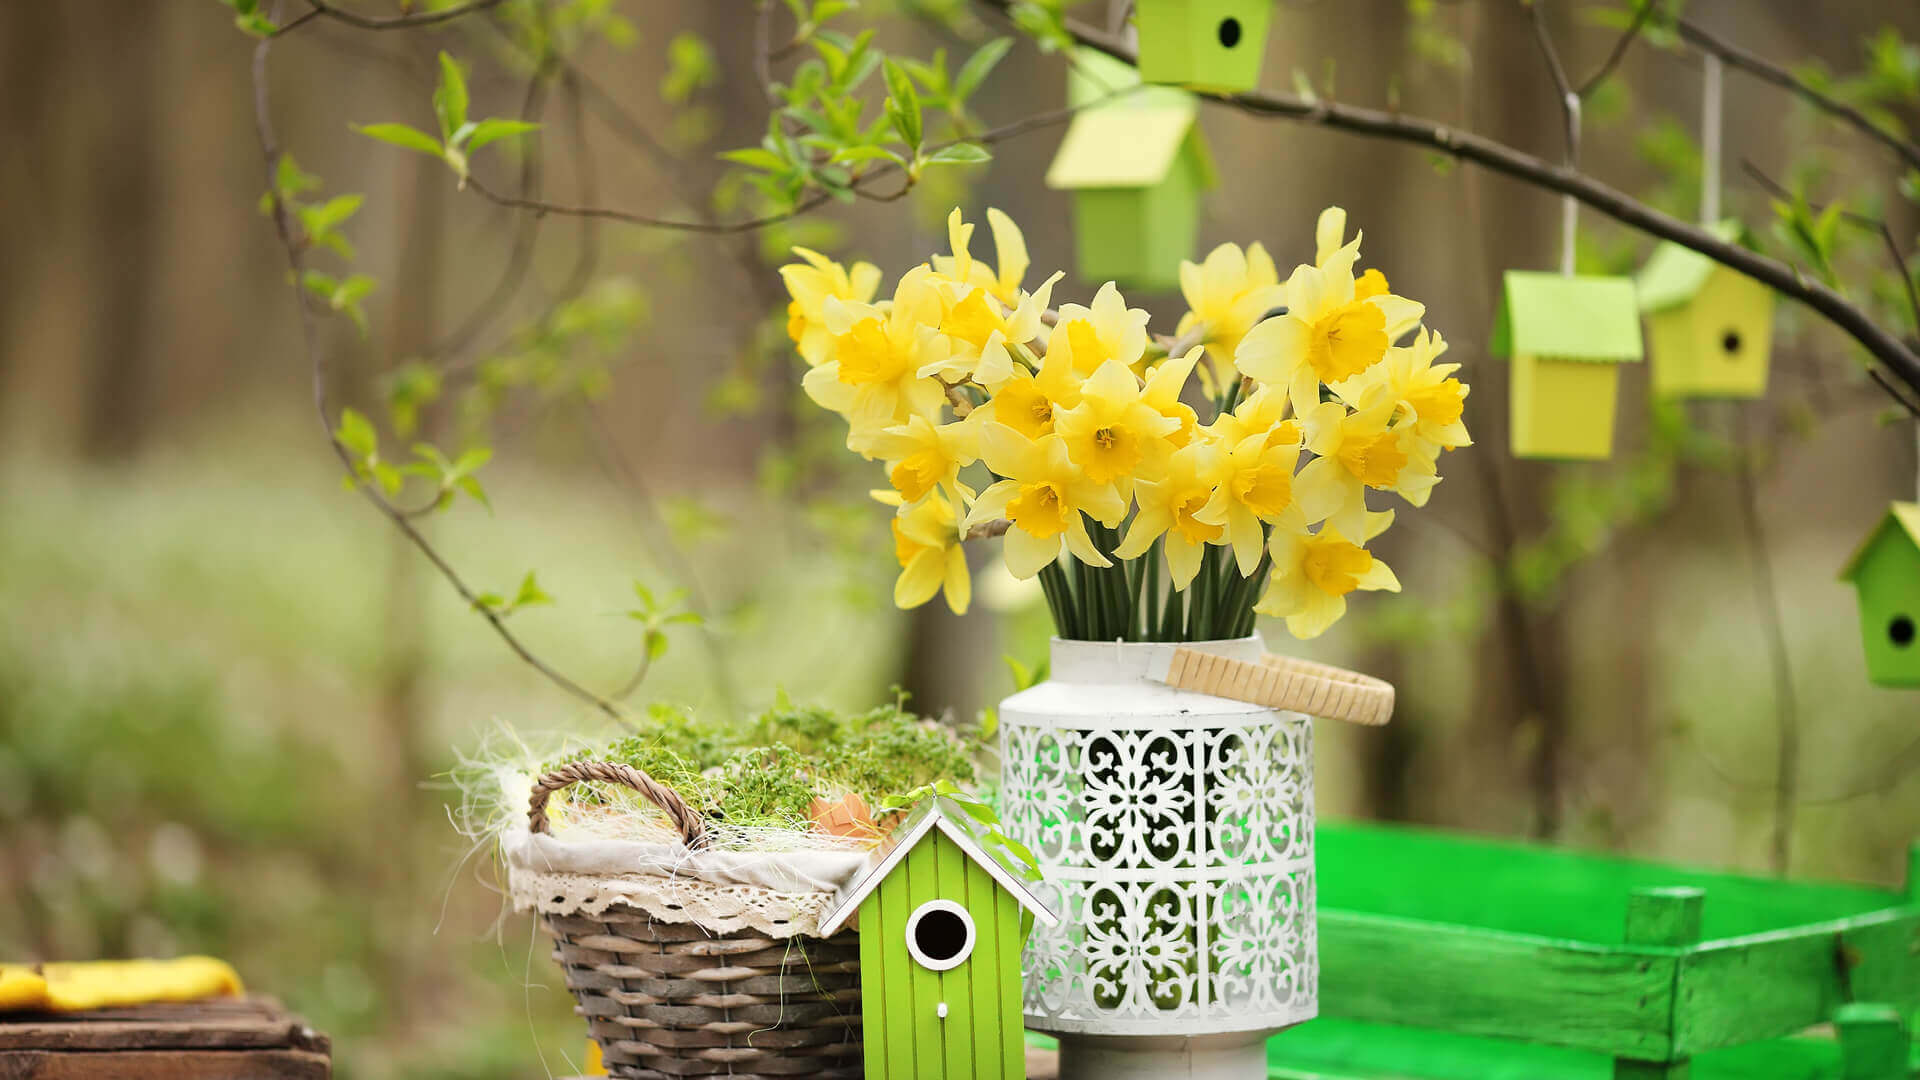 15- Spring decor and ornaments what are this year's trend